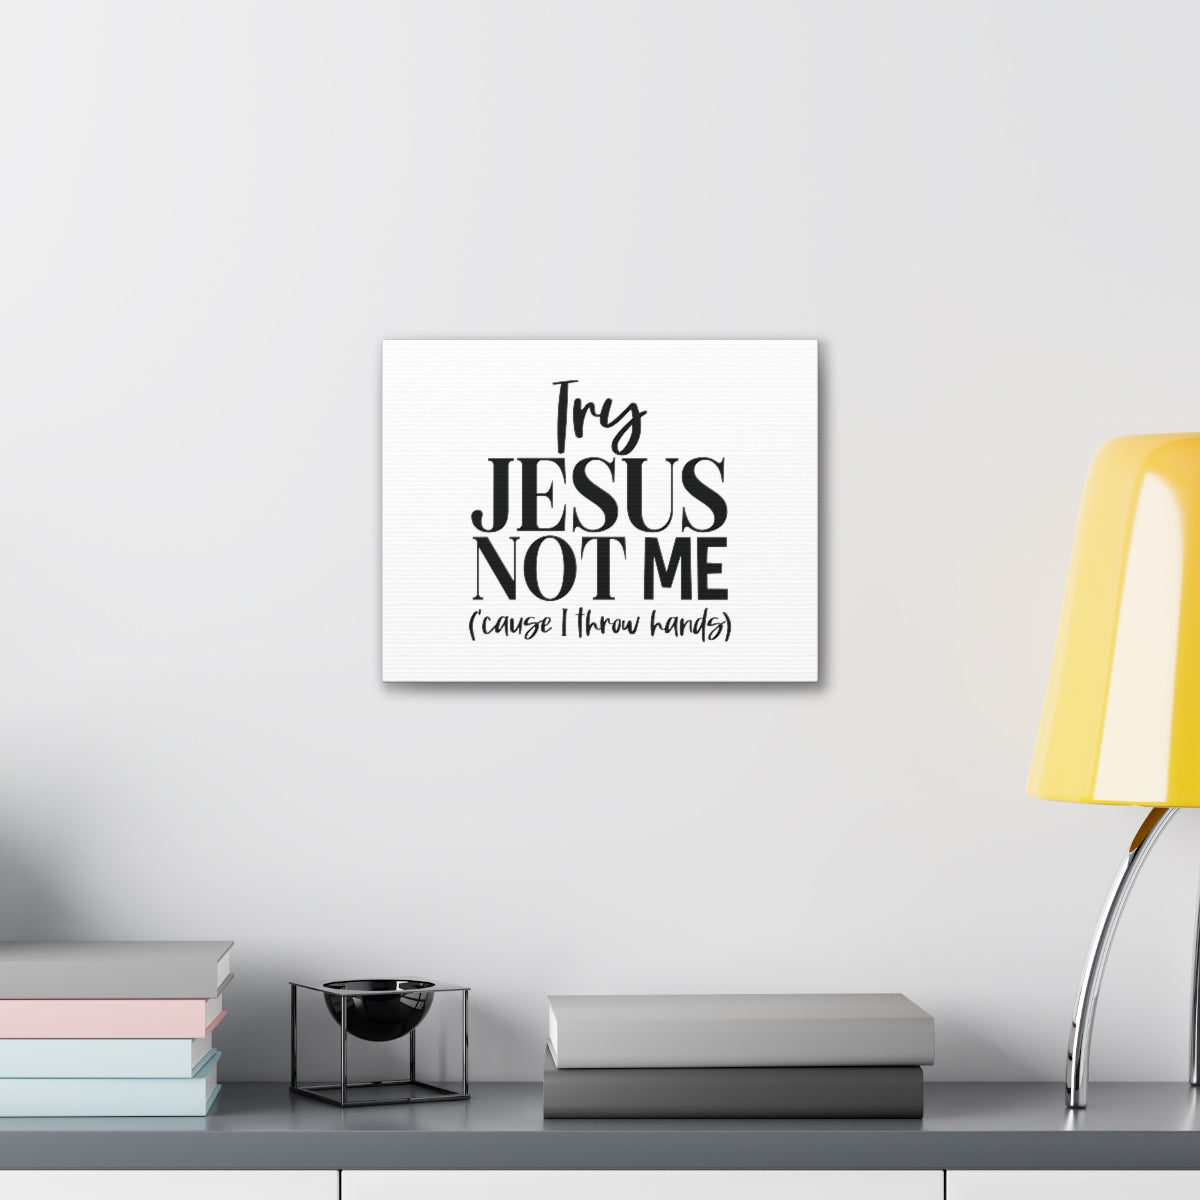 Scripture Walls Try Jesus Not Me 1 John 2:1 Christian Wall Art Bible Verse Print Ready to Hang Unframed-Express Your Love Gifts